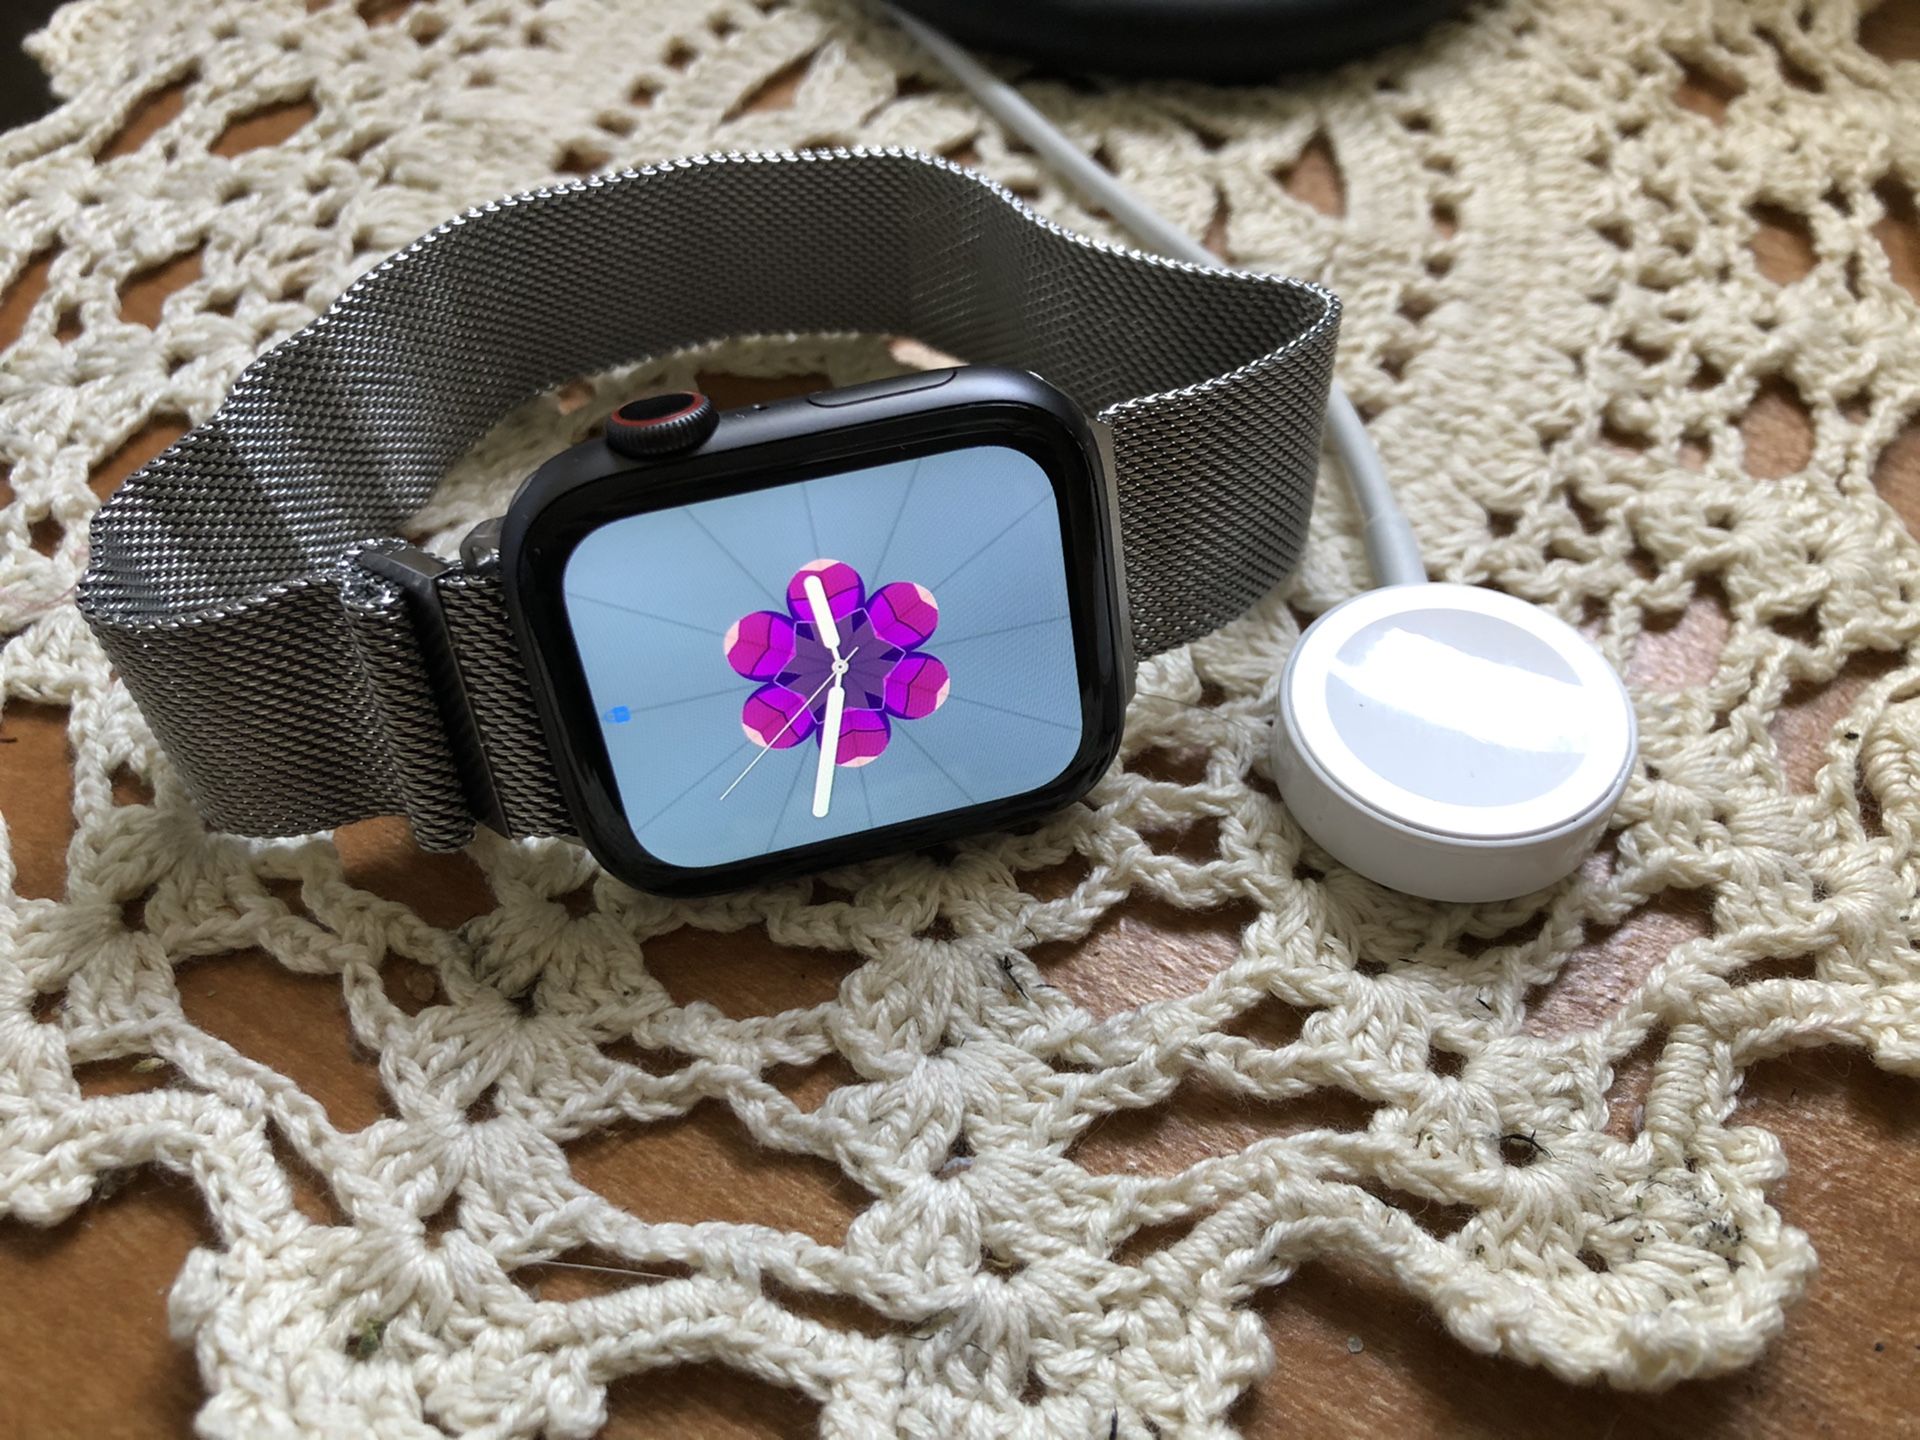 Apple Watch 4 with Cellular 44mm Space Grey